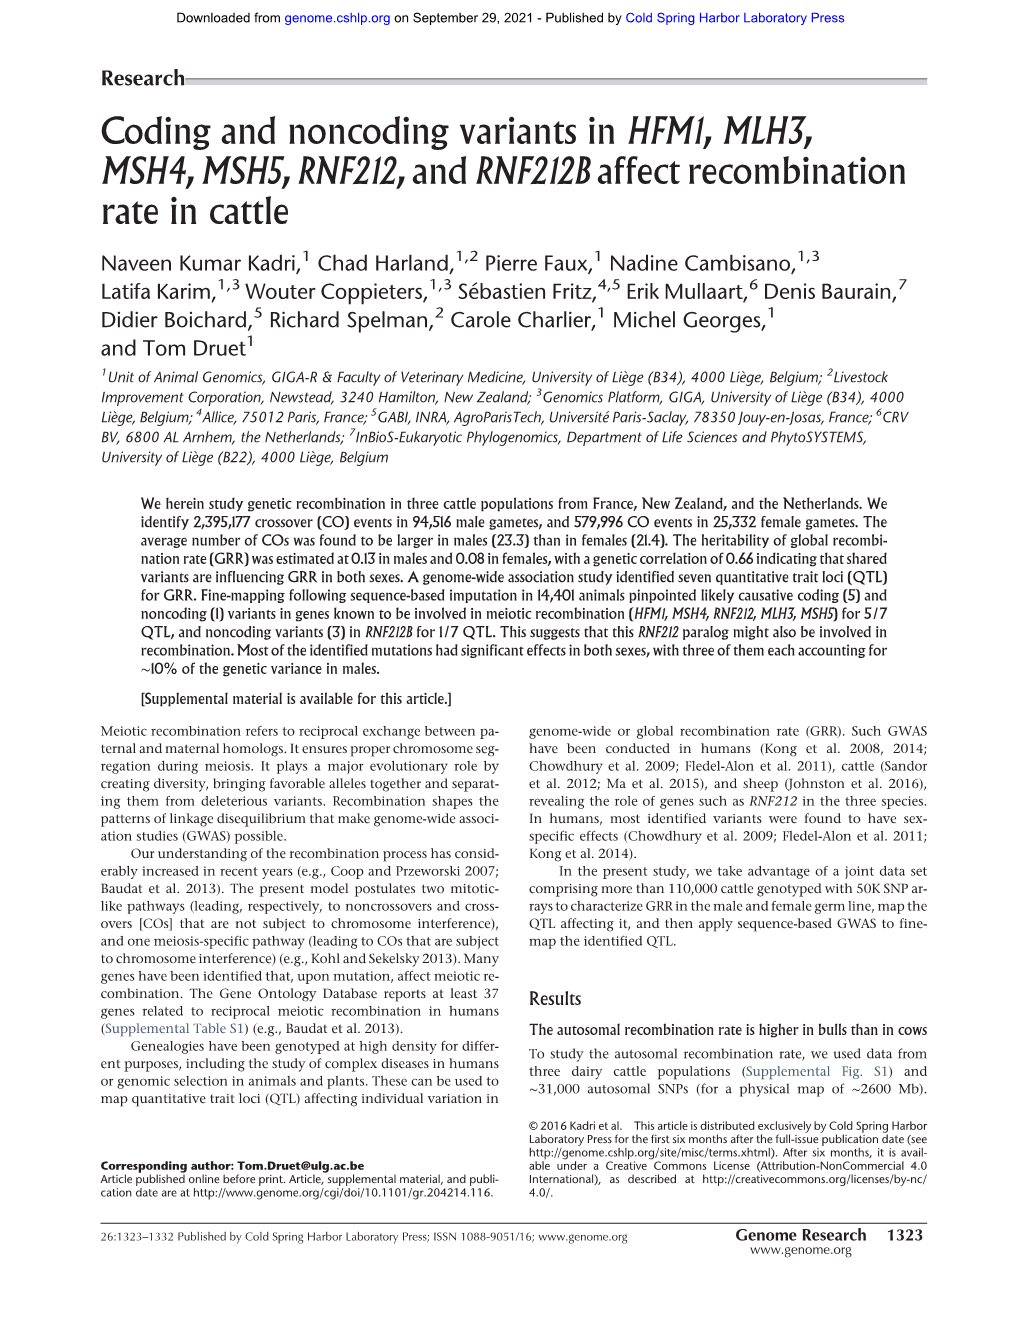 Coding and Noncoding Variants in HFM1, MLH3, MSH4, MSH5, RNF212, and RNF212B Affect Recombination Rate in Cattle